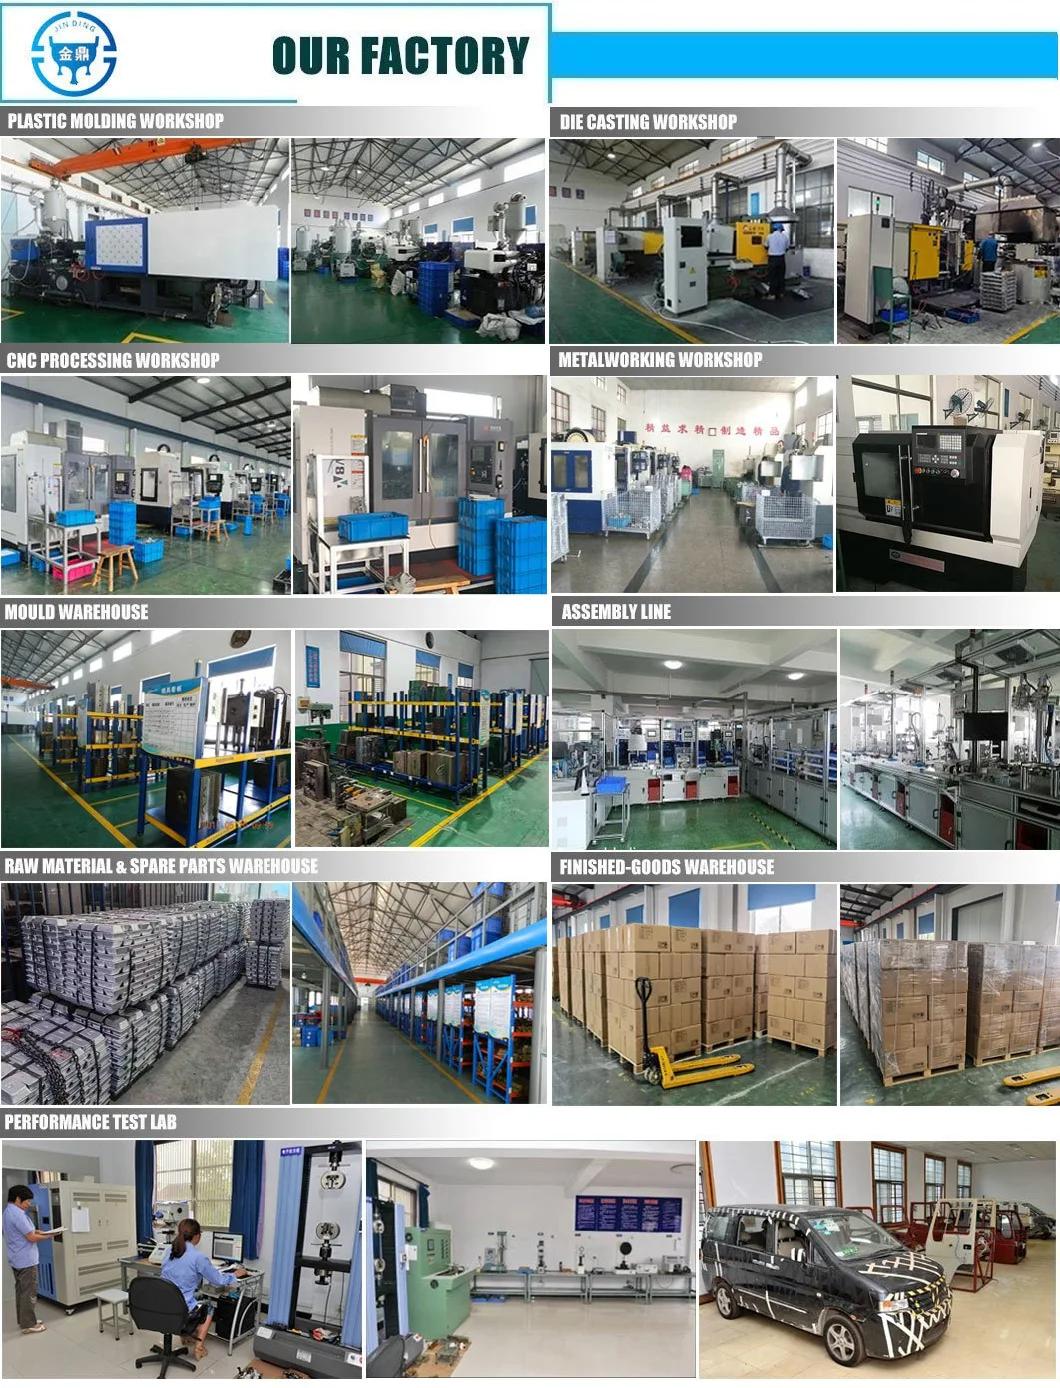 China Factory Supply Aluminum Alloy Car/Truck/Auto Parts Die Casting Mould